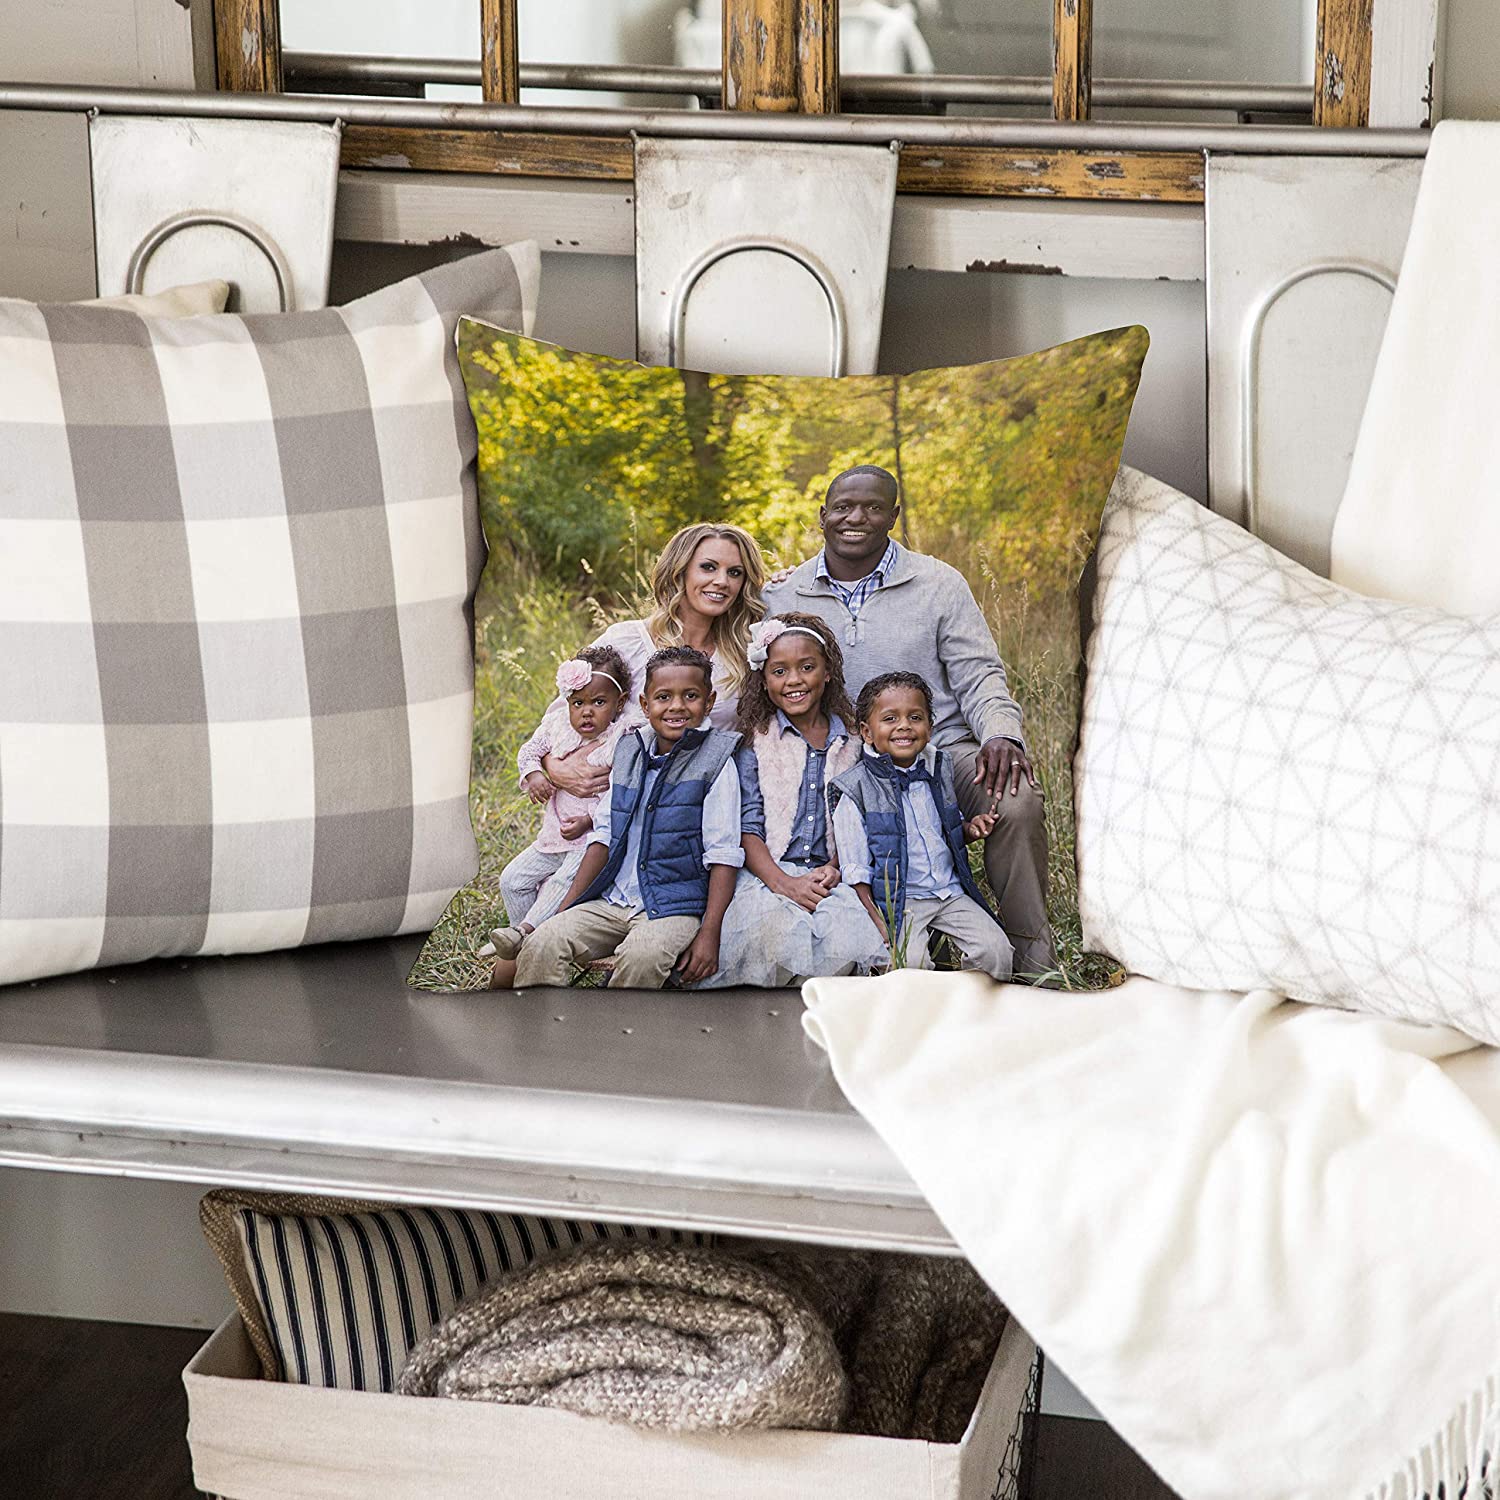 Make Your Own picture Pillow